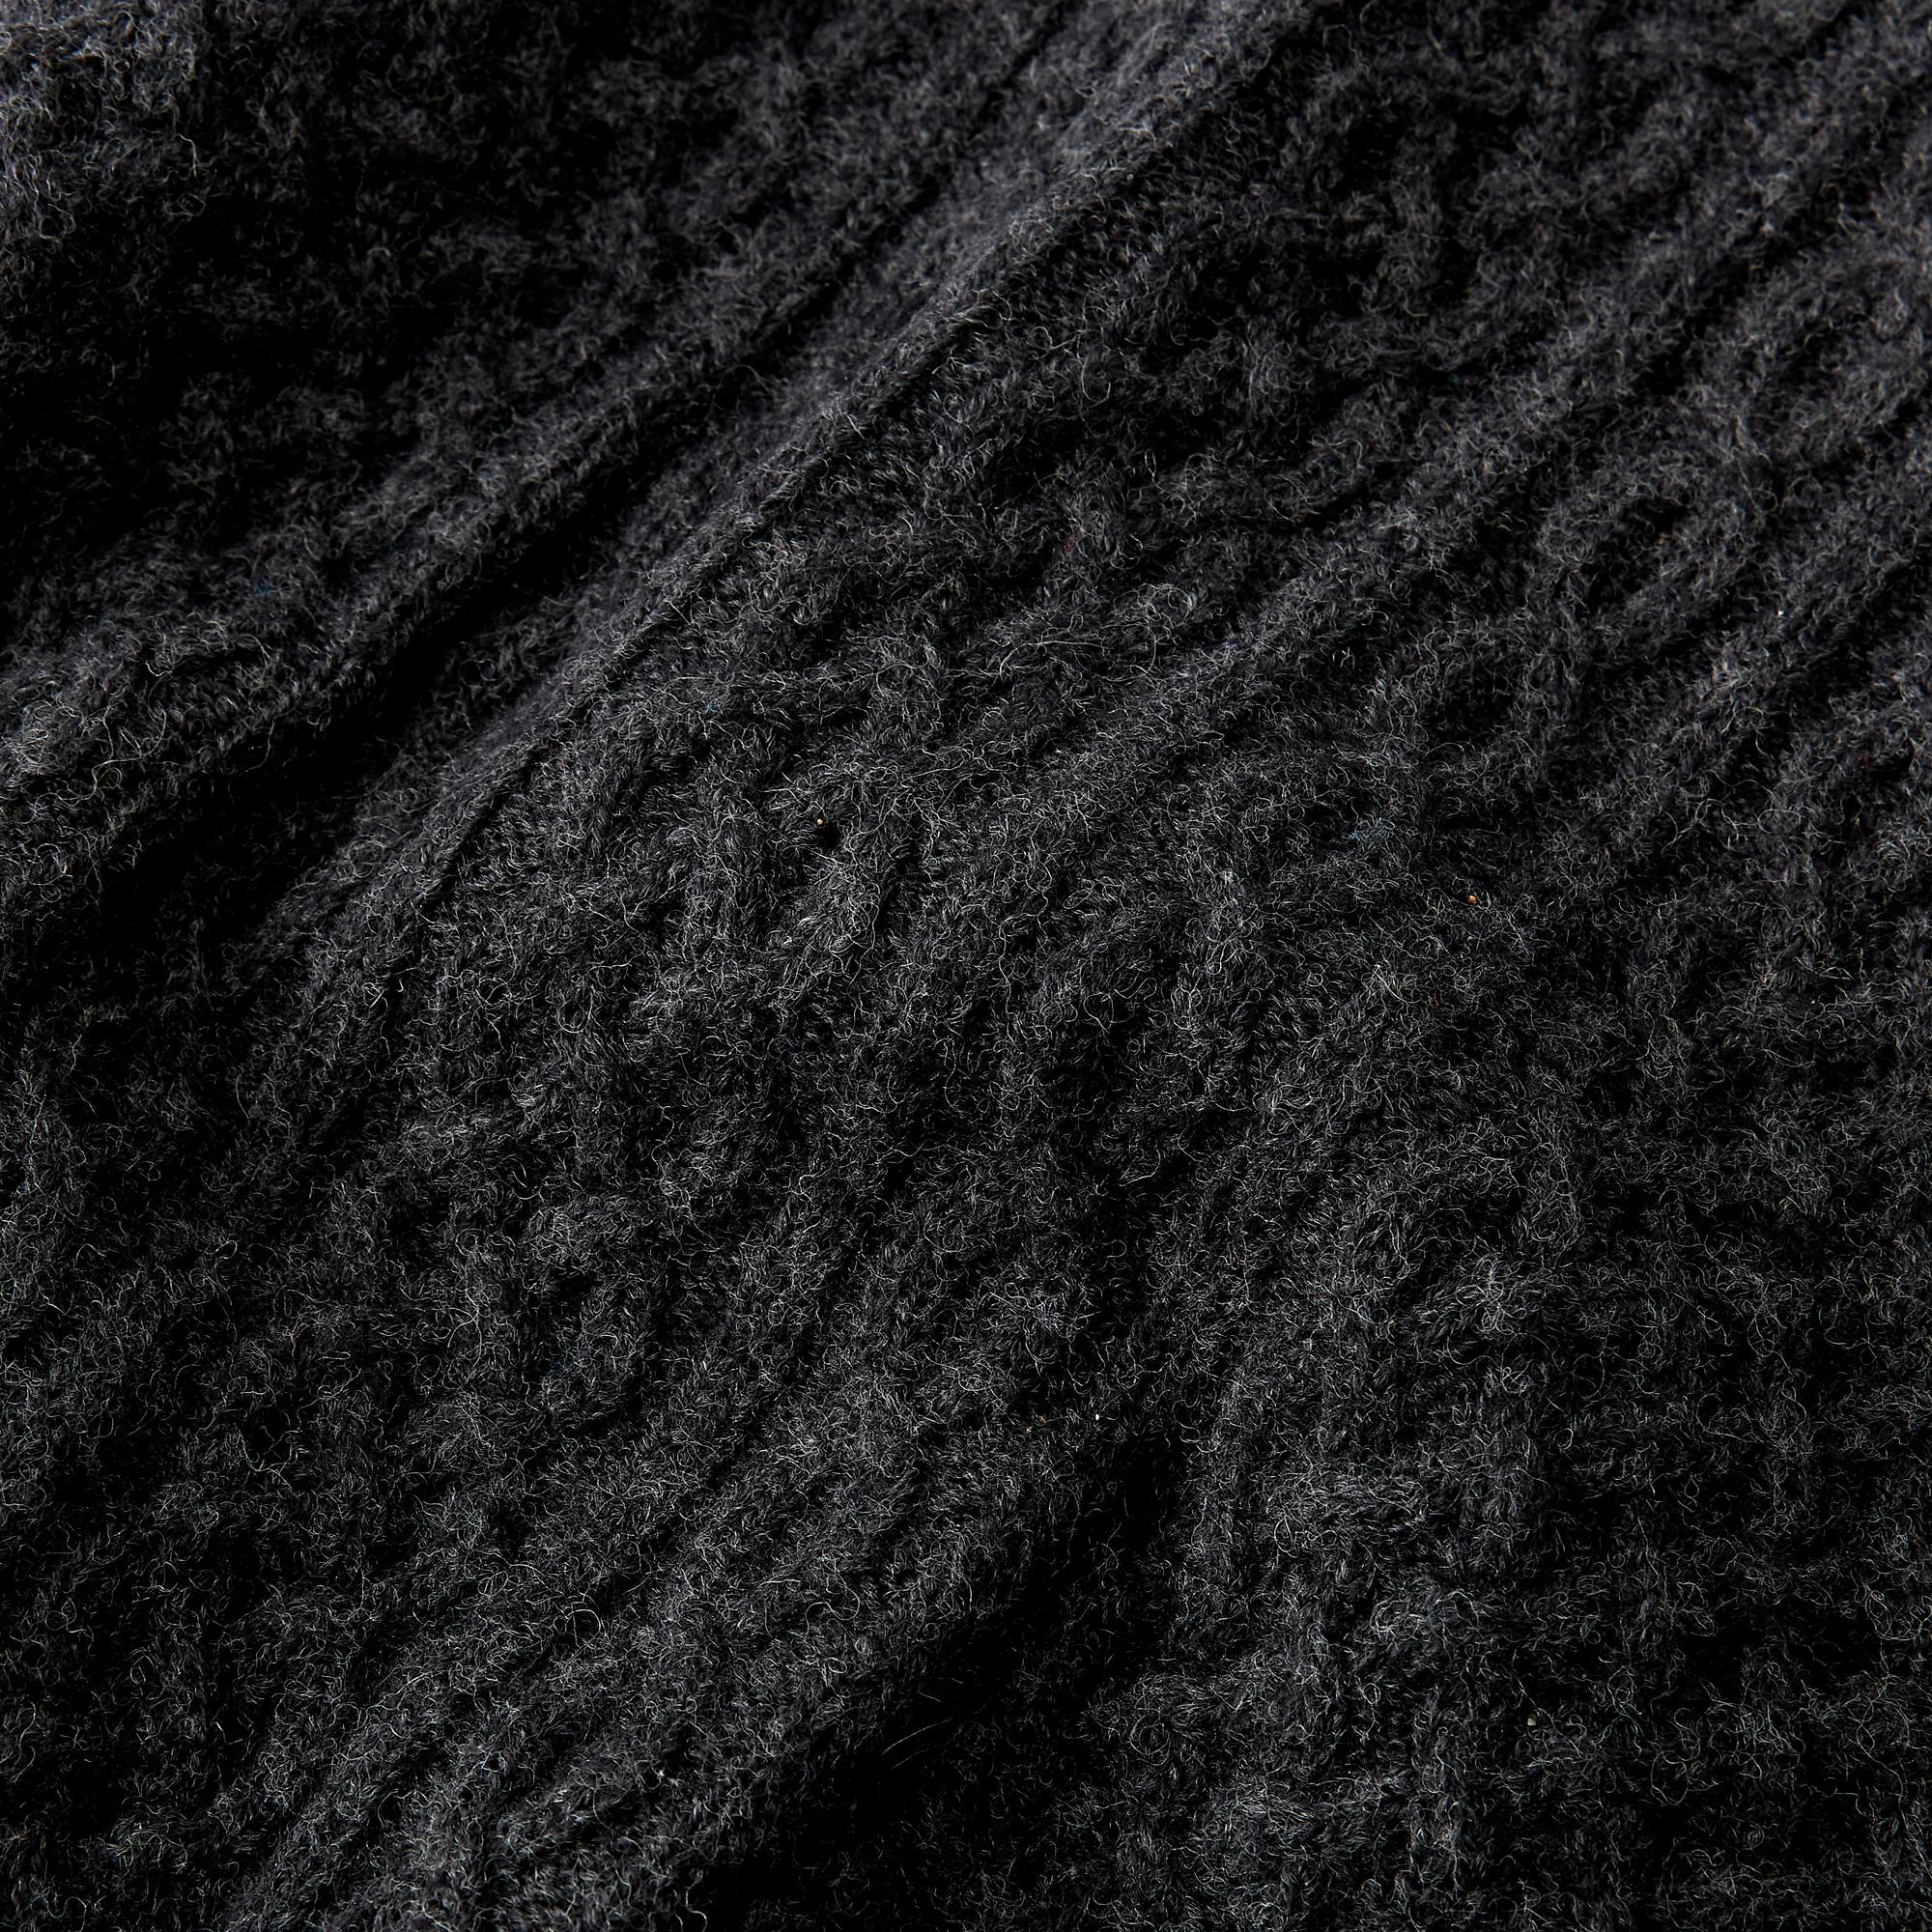 Wills Cable Knit Wool Sweater